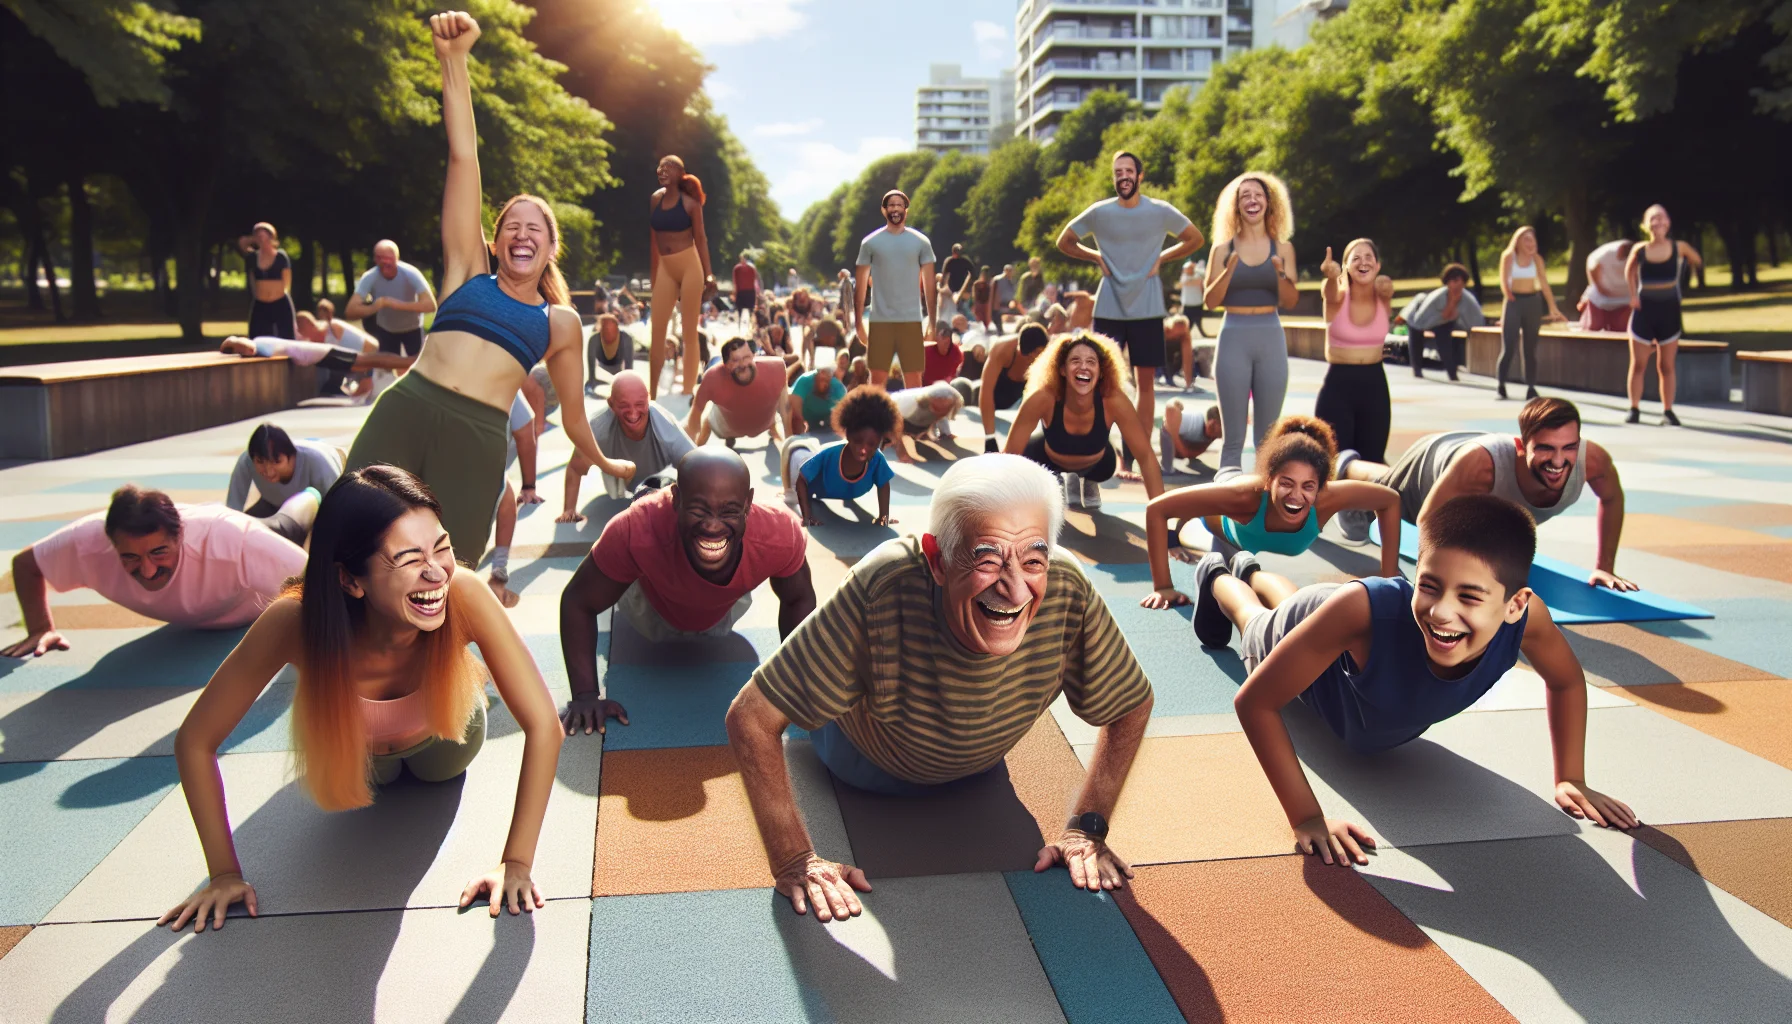 Create a humorous and realistic image of outdoor fitness. Visualize a sunlit public park filled with people of all ages, races, and genders participating in a push-ups challenge. Everyone is laughter-filled, trying to outdo each other in a friendly competition. The diverse spectacle includes an elderly Caucasian man impressively doing a set, a young Hispanic woman laughing as she struggles, a Black child showing off unusual push-up styles, and a Middle-Eastern teenager demonstrating a perfect technique. The scene underscores the amusing, challenging, and encouraging moments of shared workouts, hoping to inspire viewers to love exercise.